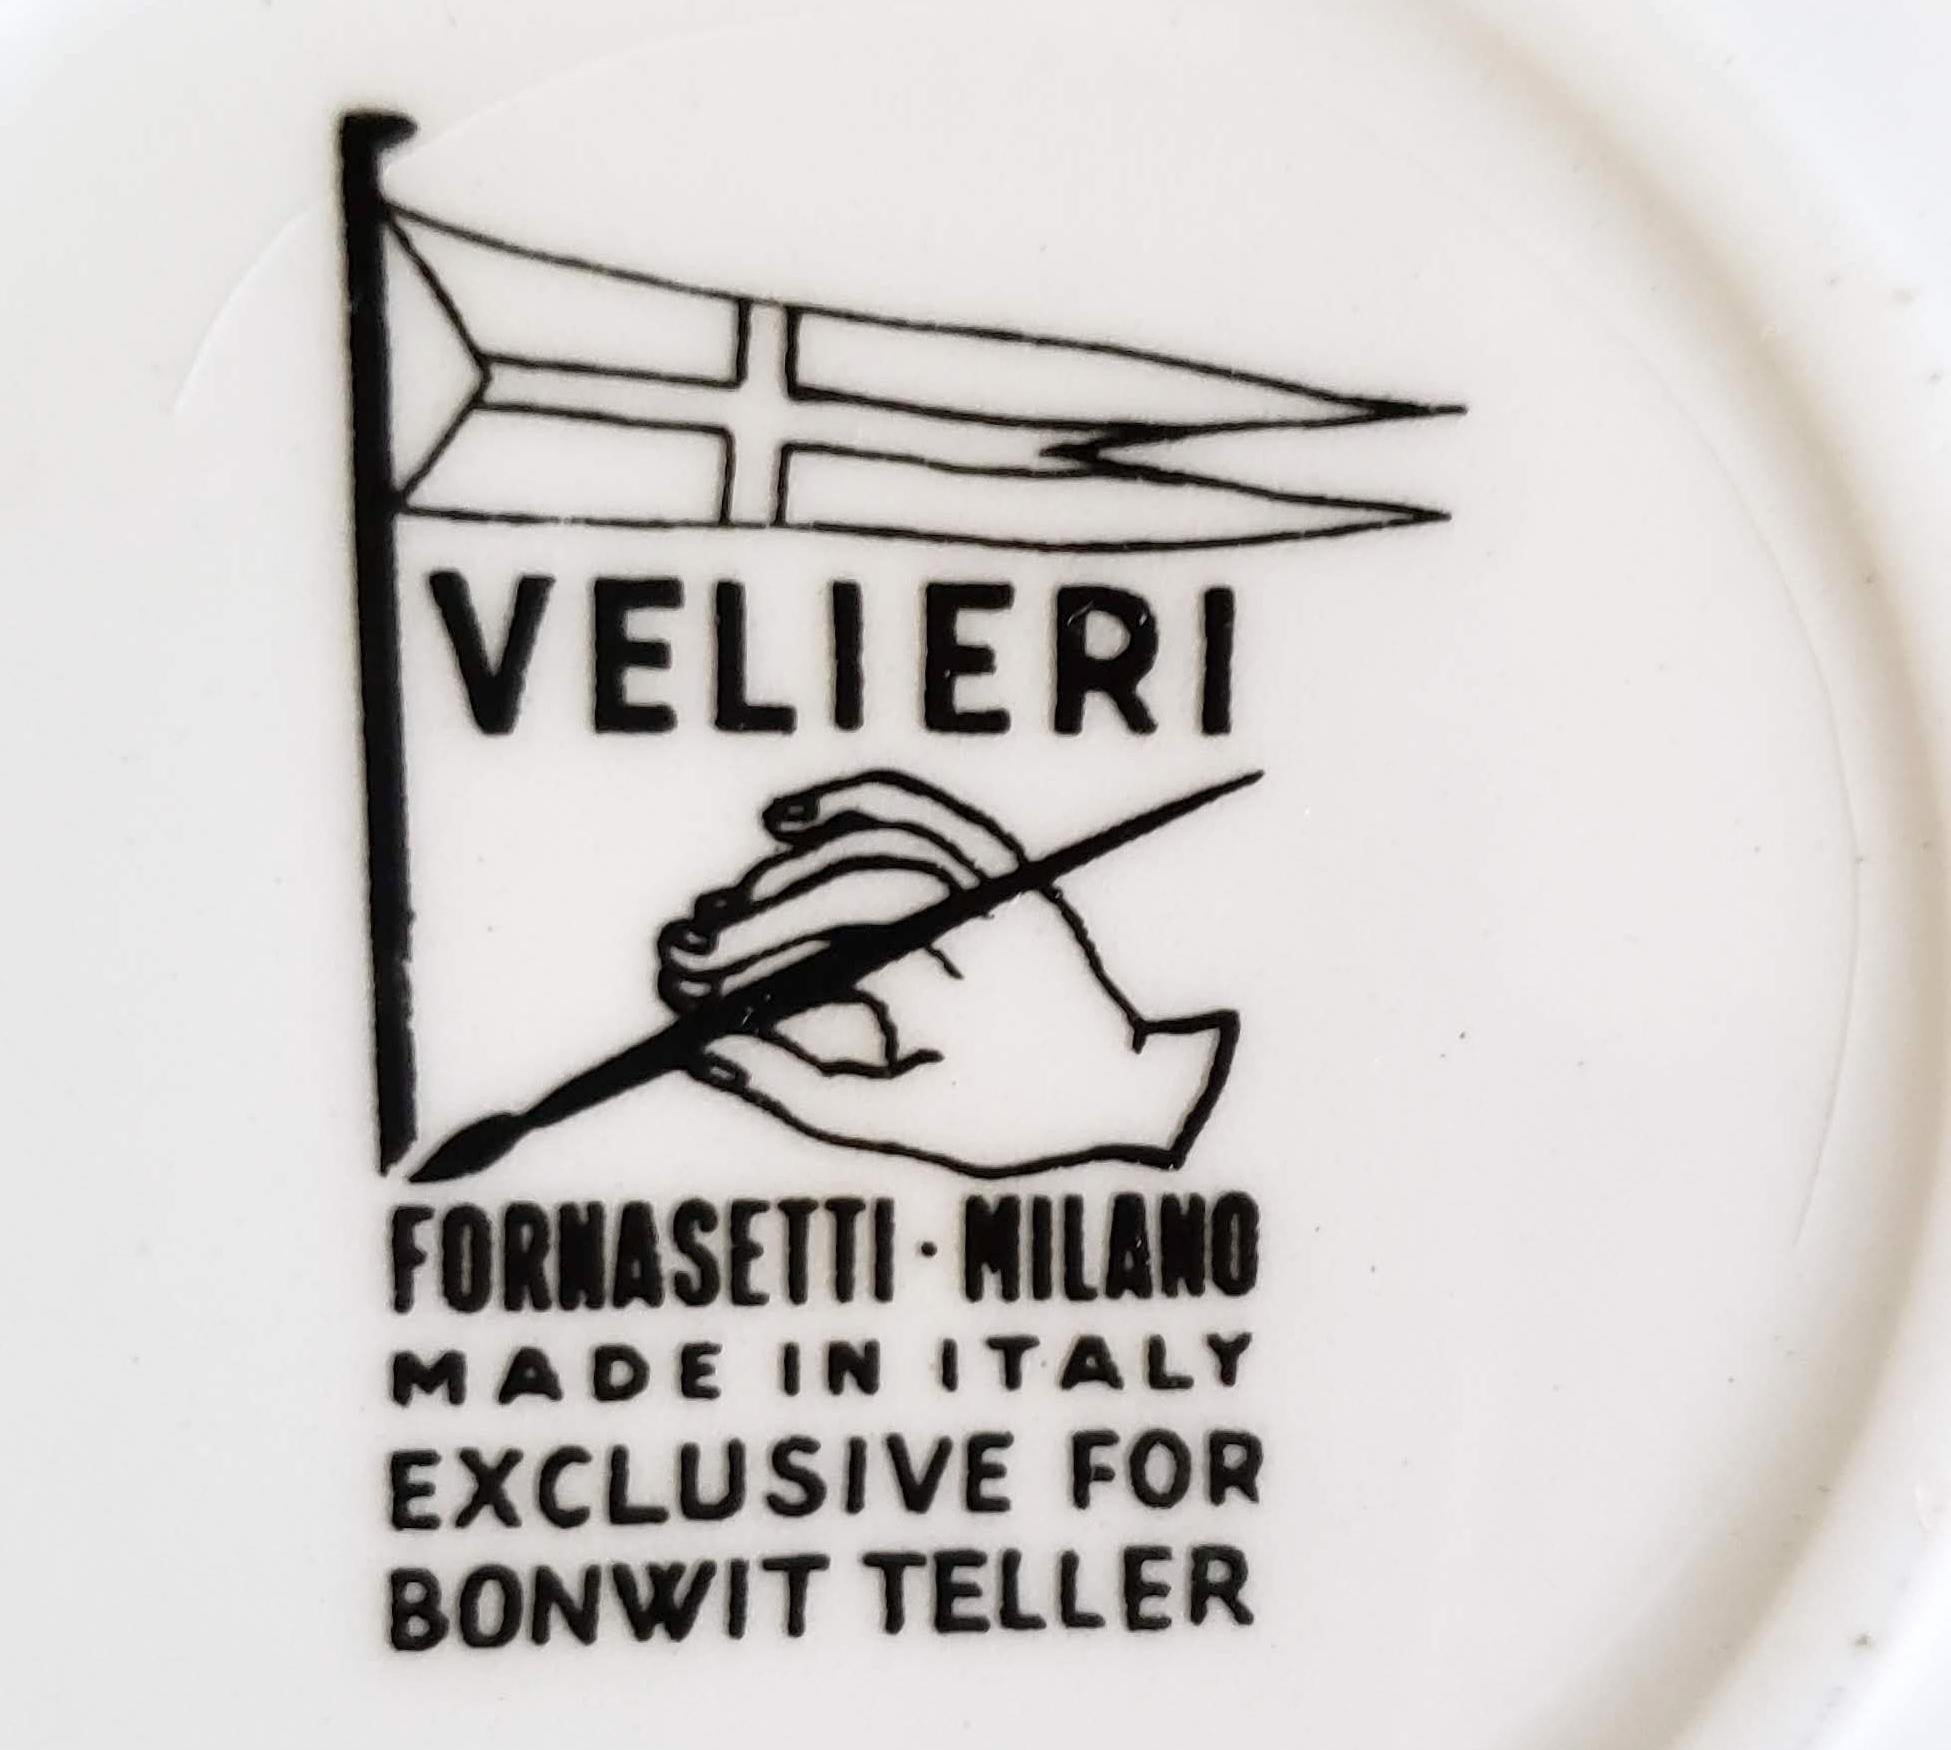 Piero Fornasetti Porcelain set of eight ship coasters,
Velieri with original box,
circa 1960

The complete set of eight Piero Fornasetti coasters each depict a different Spanish galleon. The coasters come with their original gold box. 

The